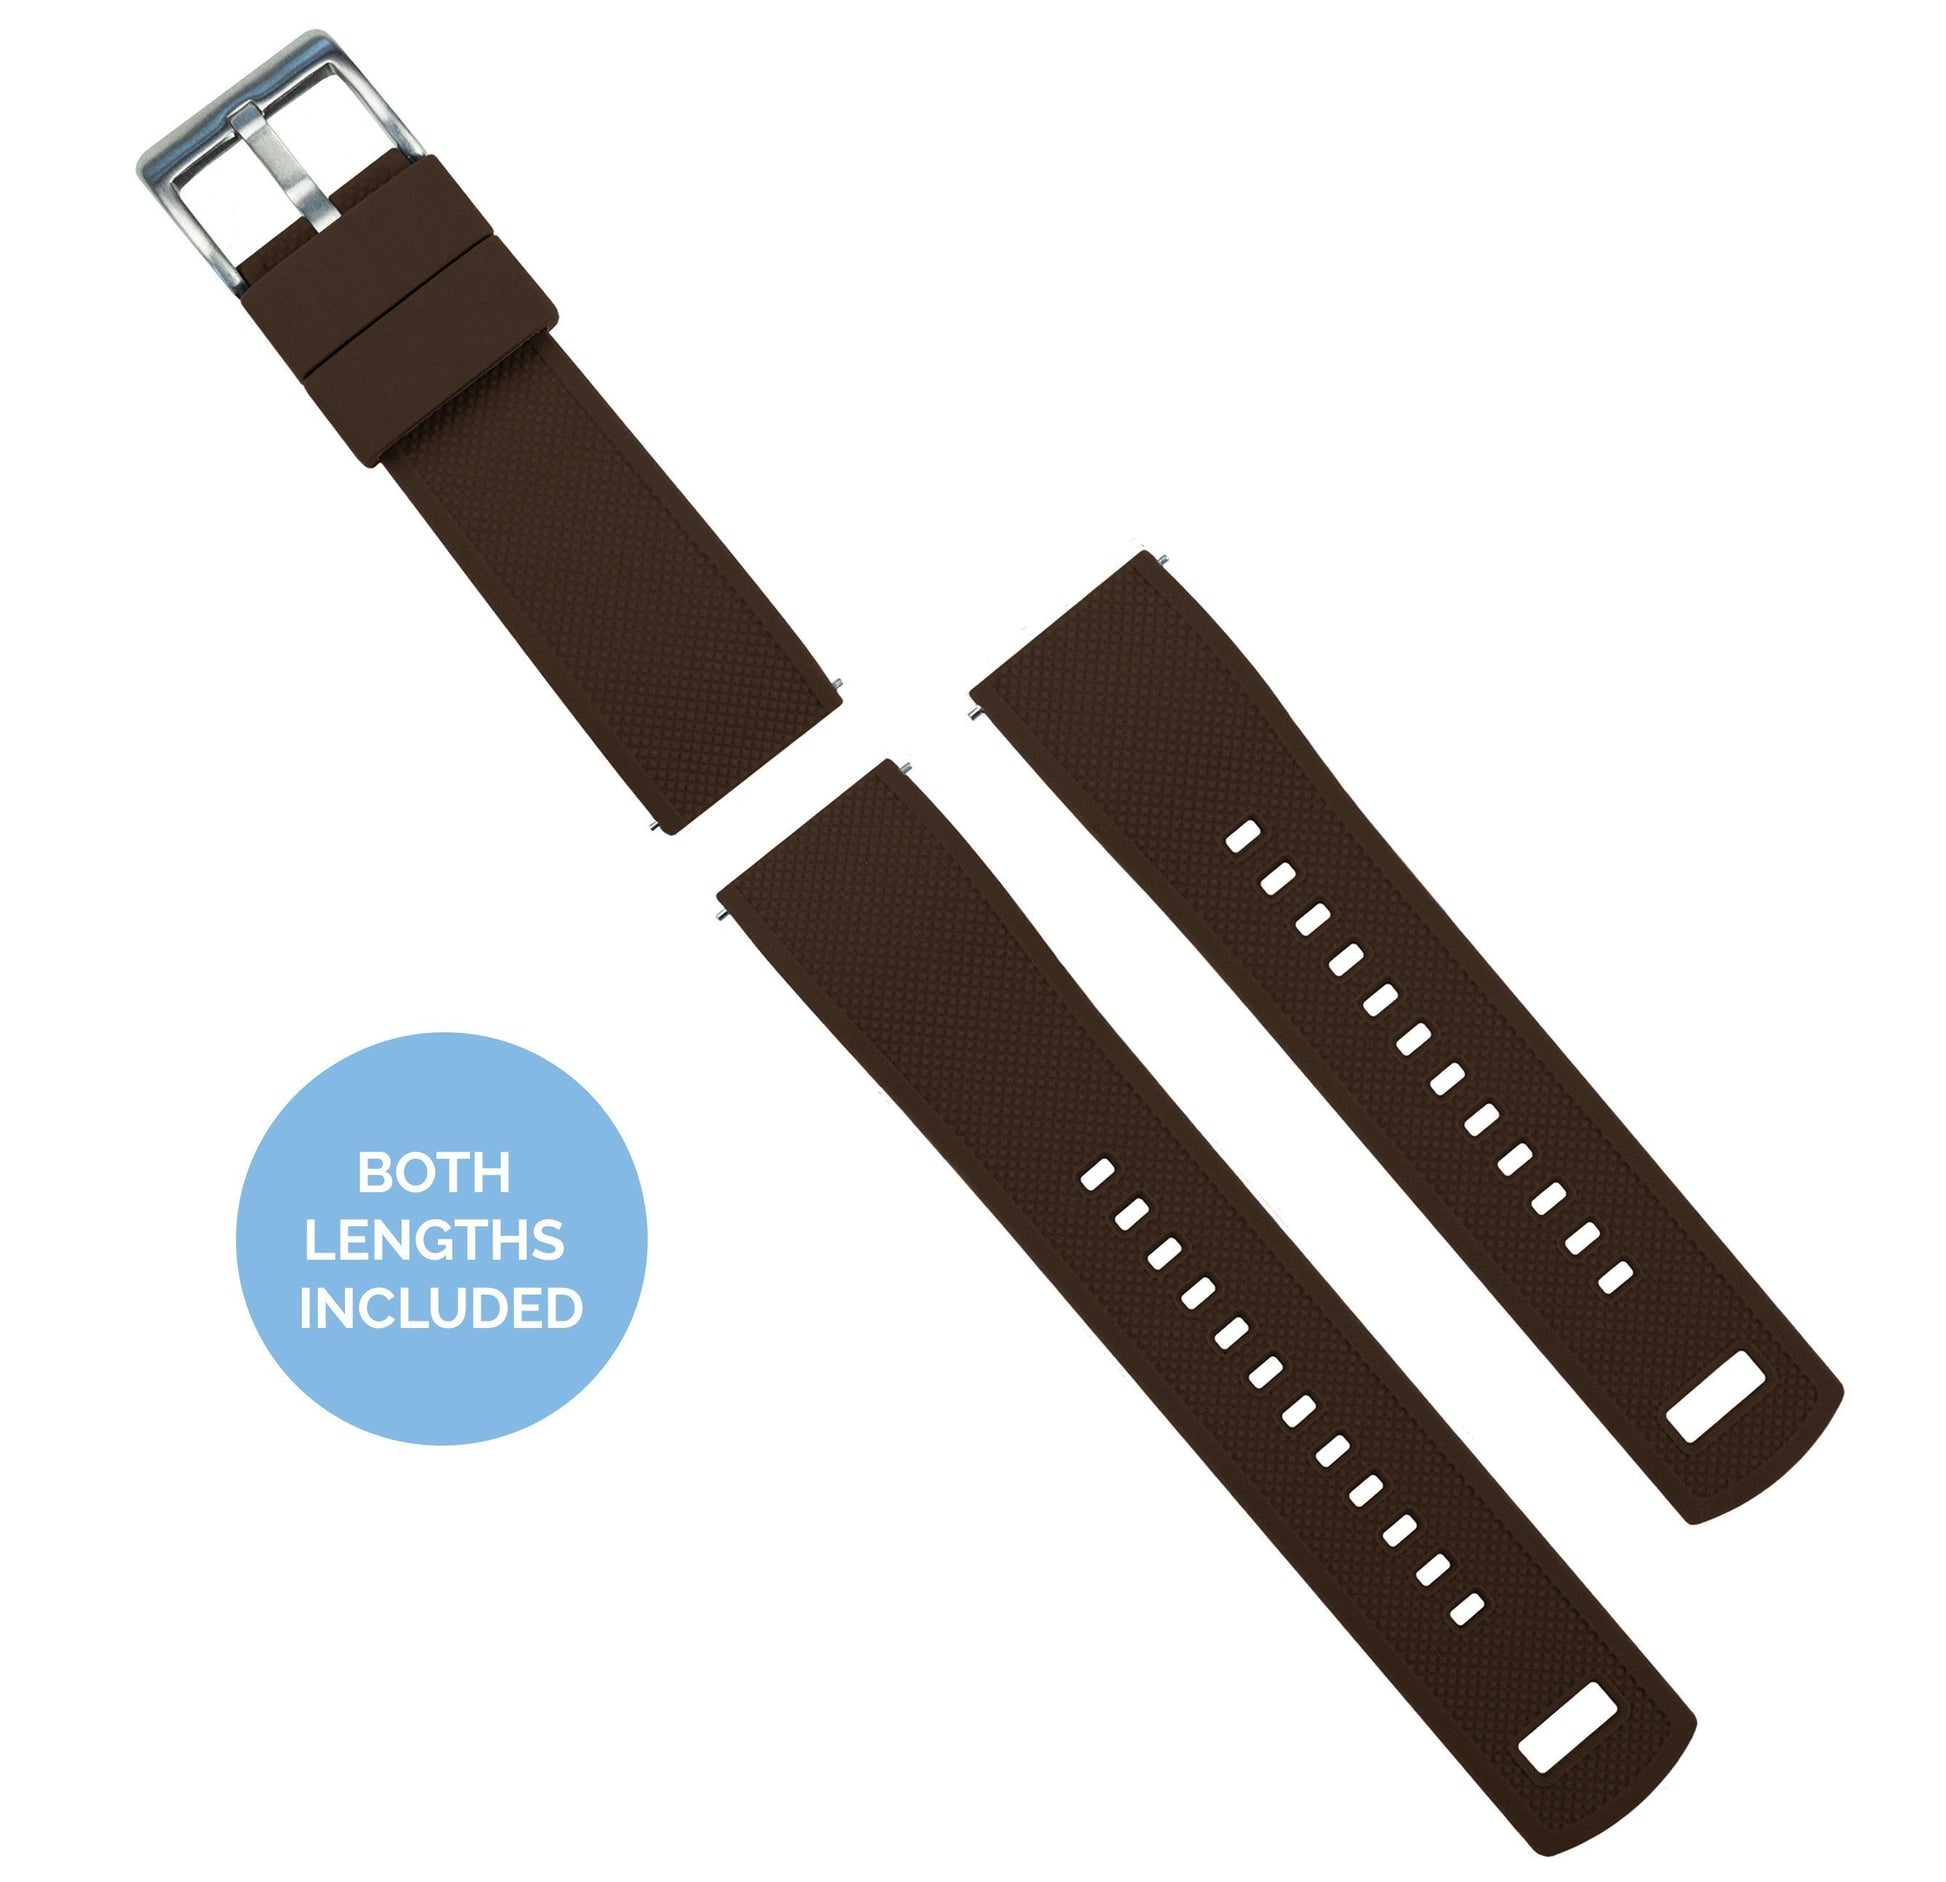 Withings Nokia Activité and Steel HR | Elite Silicone | Brown Top / Khaki Bottom - Barton Watch Bands